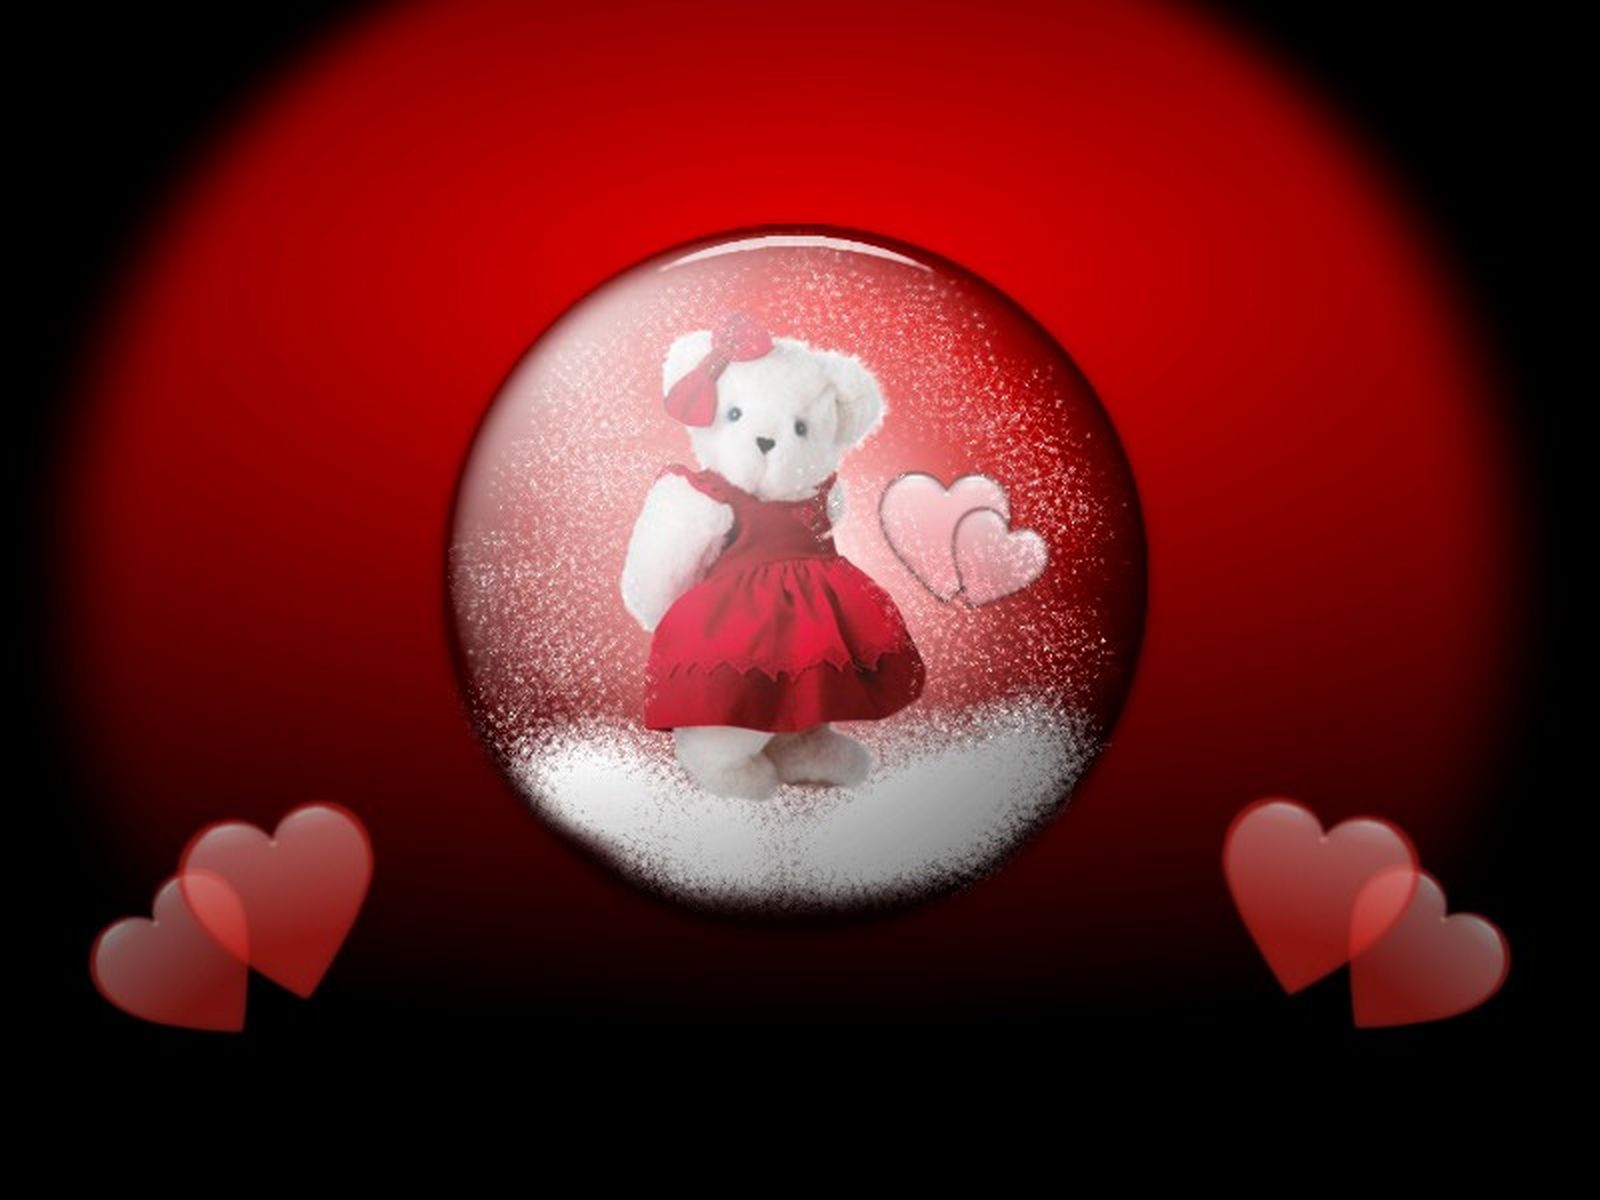 Red Cute Wallpapers For Mobile - HD Wallpaper 